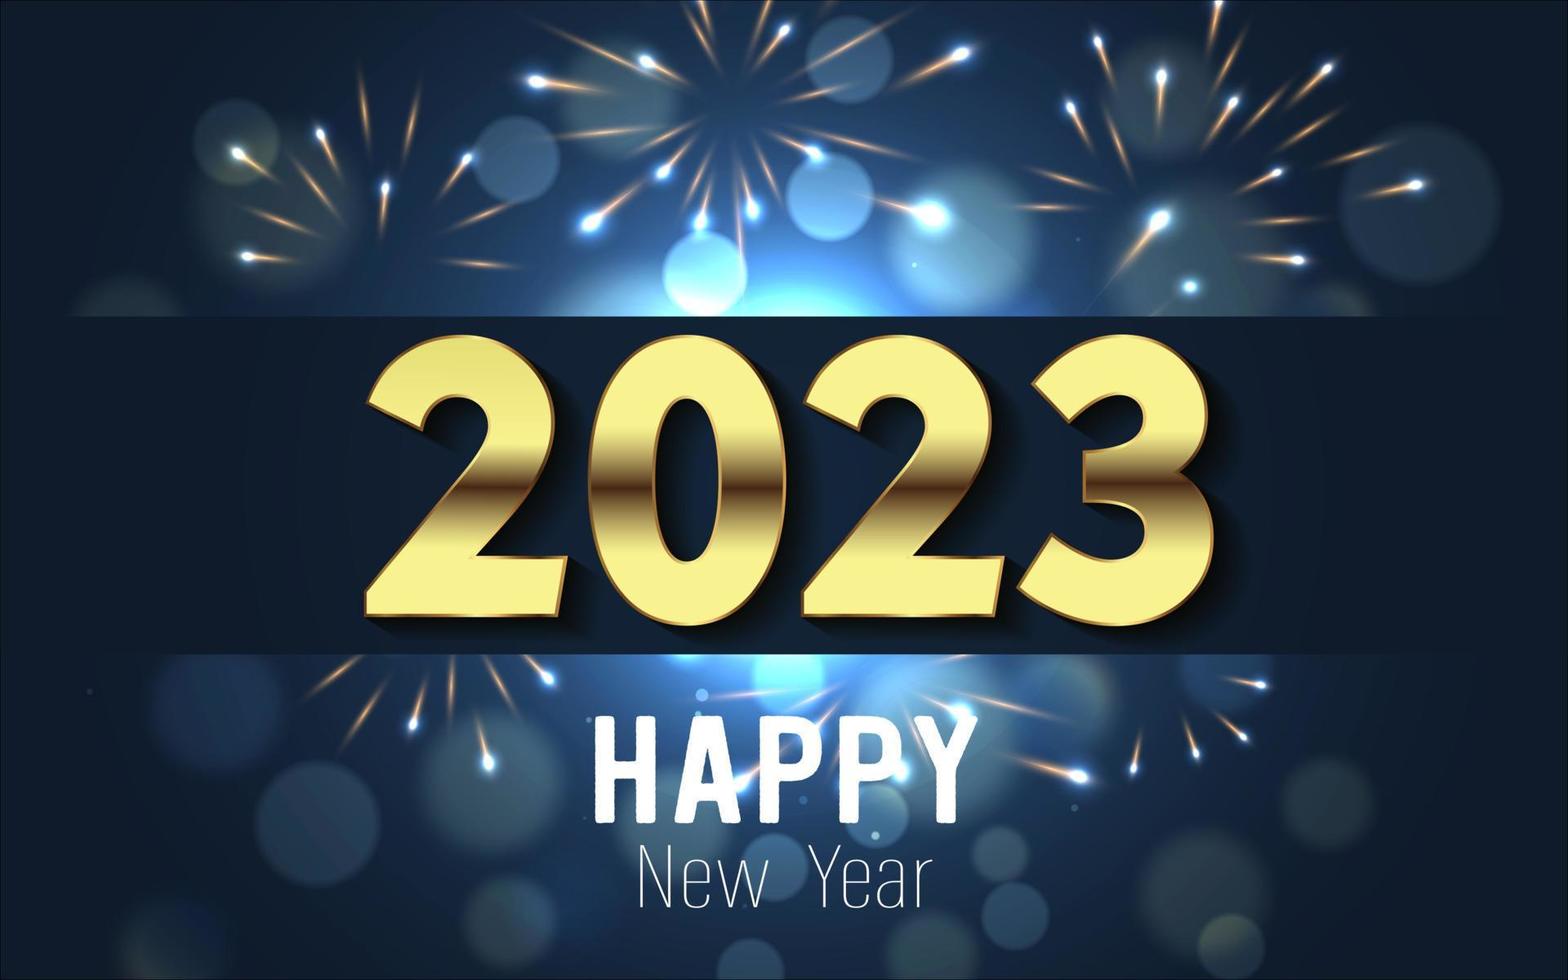 https://static.vecteezy.com/system/resources/previews/016/901/654/non_2x/happy-new-year-2023-gold-metal-number-and-text-whit-bokeh-bubber-and-fireworks-on-blue-gradient-background-vector.jpg